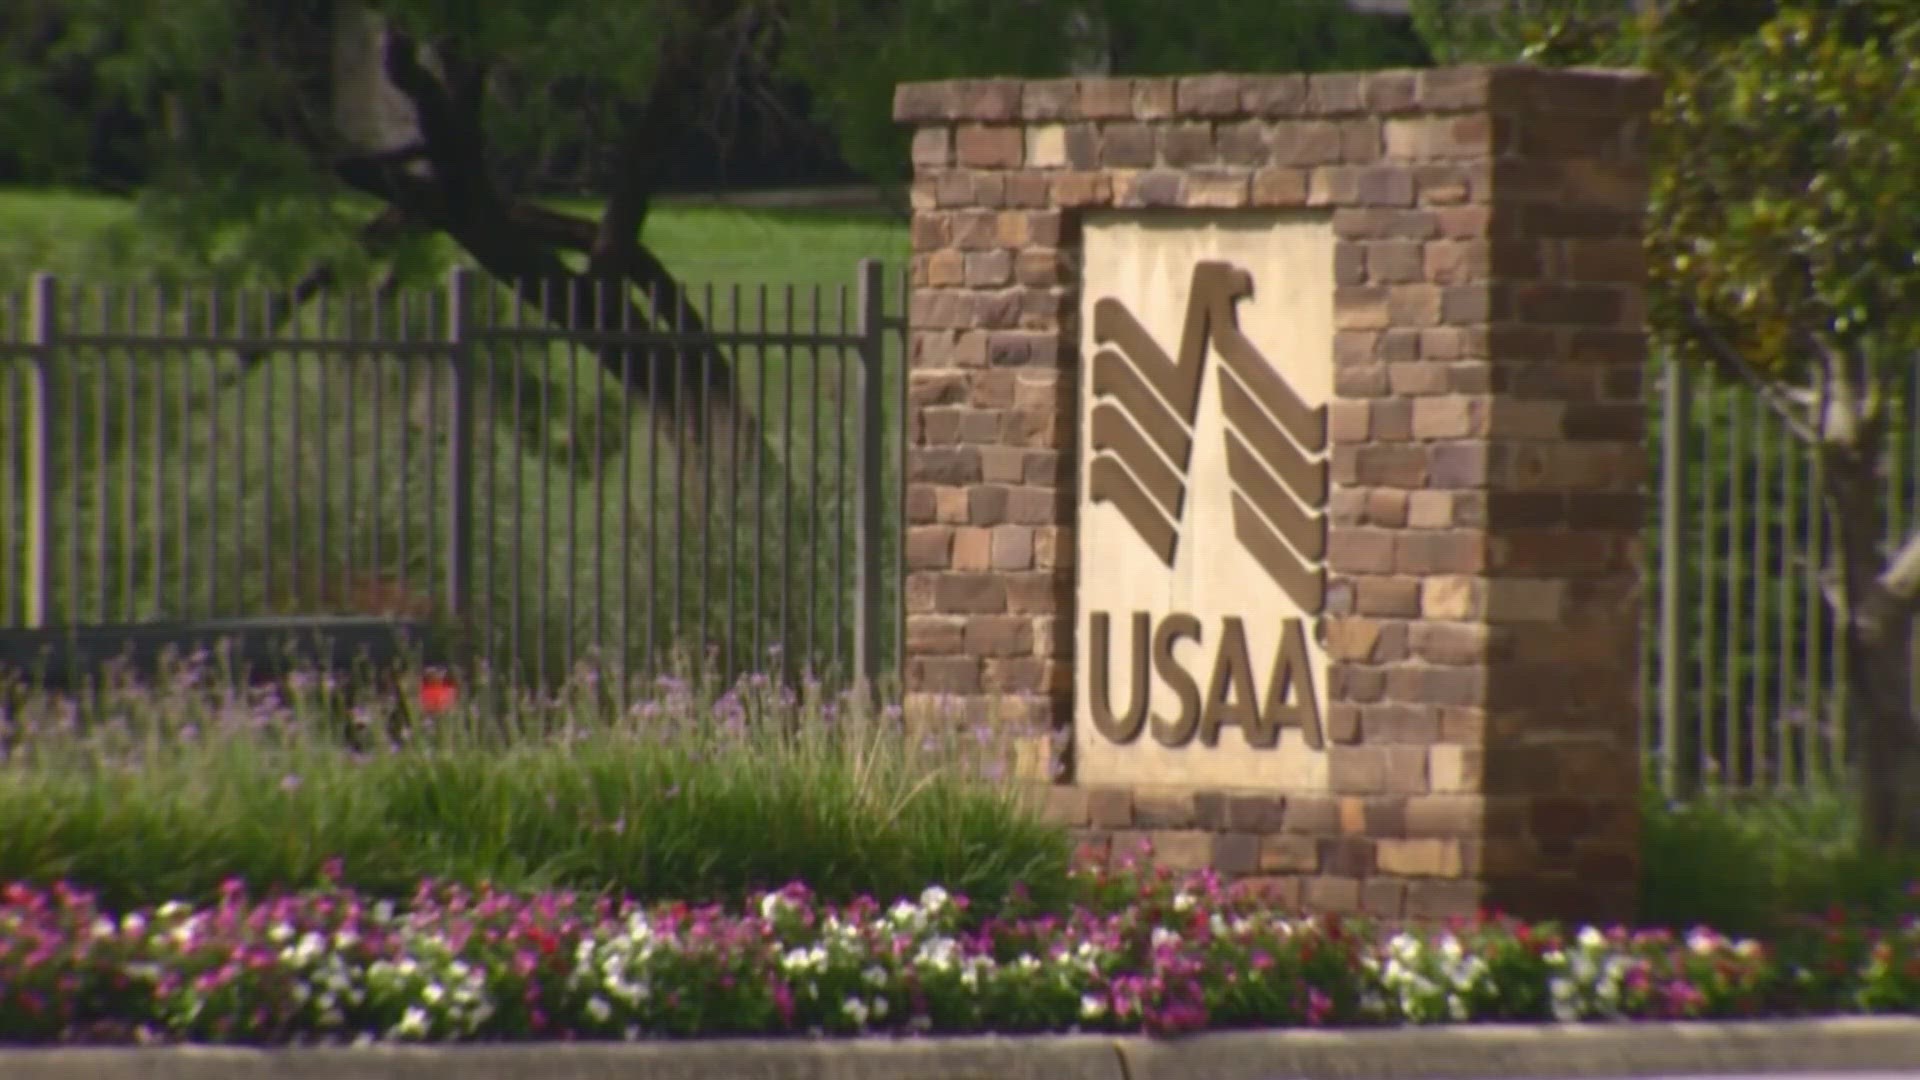 Becky Heye saw $12,000 disappear from her USAA accounts. After fighting with customer service for more than a month, she called KENS 5.